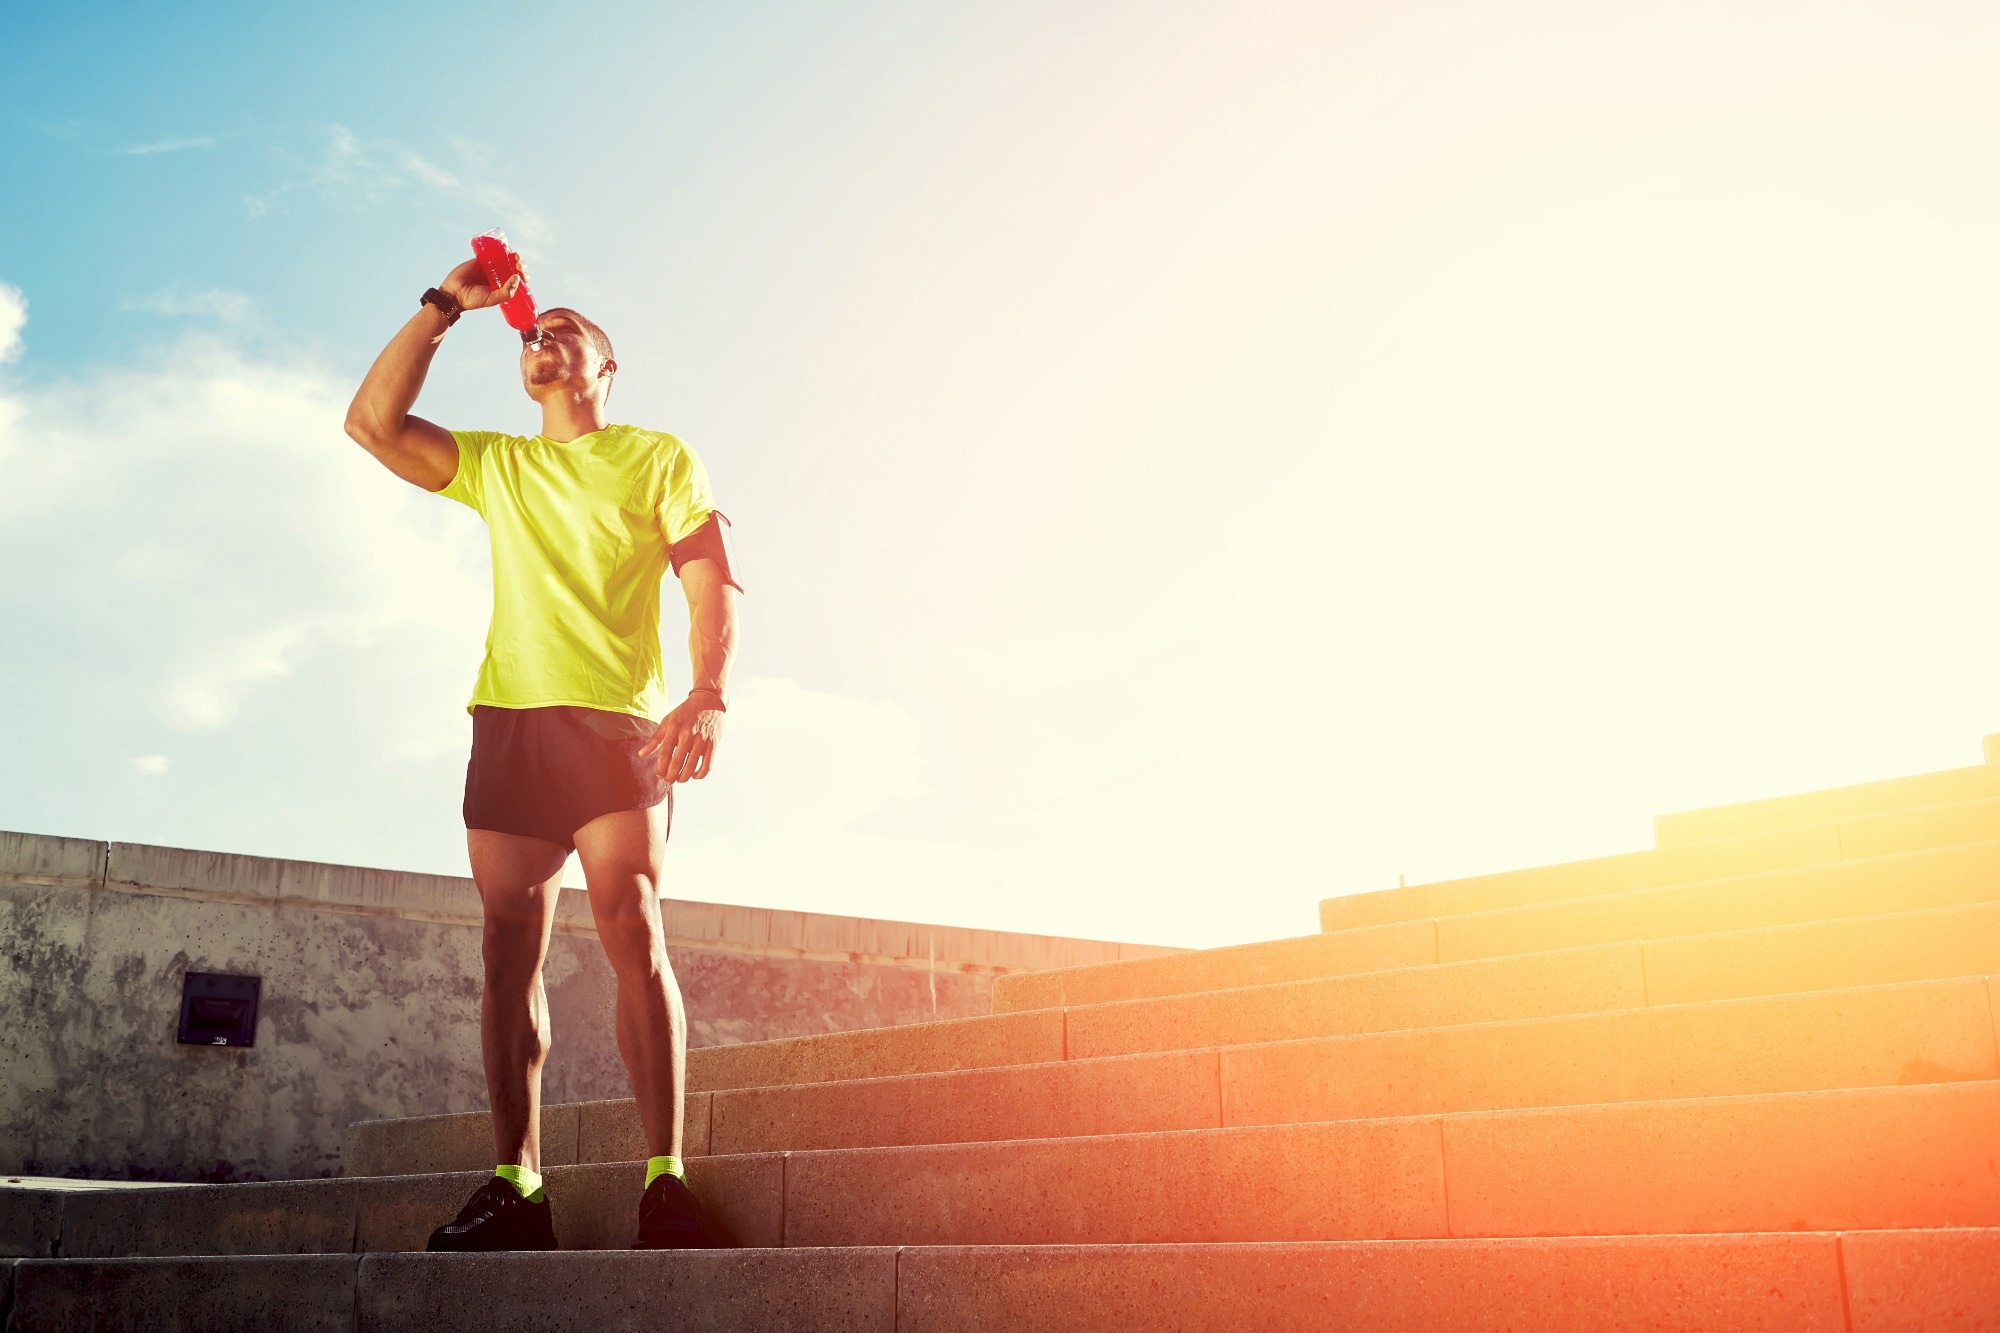 Study: Post-Exercise Rehydration in Athletes: Effects of Sodium and Carbohydrate in Commercial Hydration Beverages. Image Credit: GaudiLab / Shutterstock